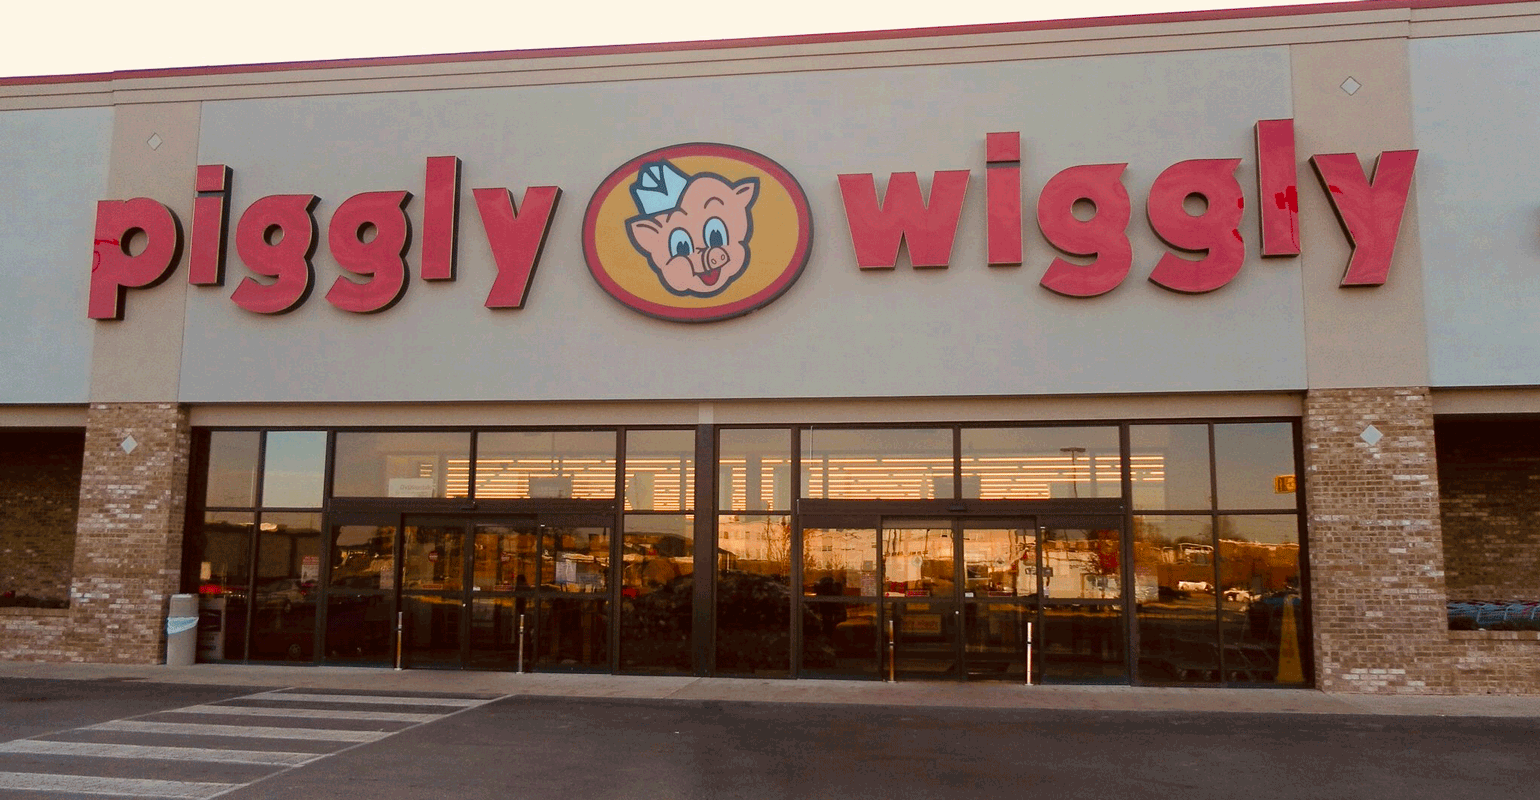 Piggly Wiggly holds its ground in the South.